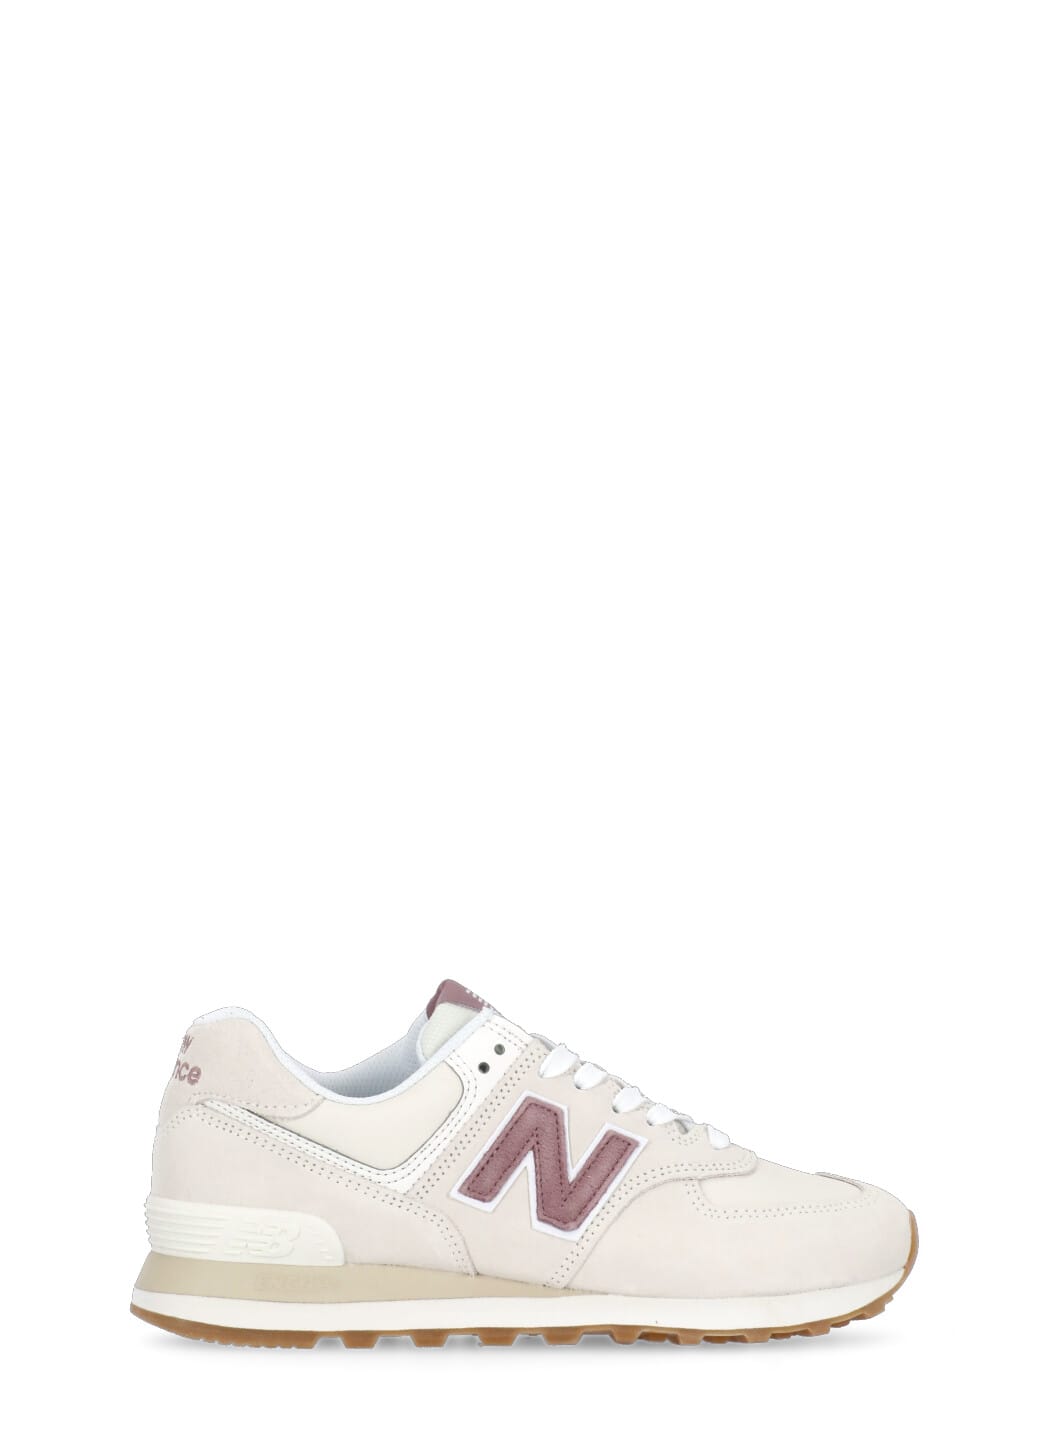 NEW BALANCE 574 SNEAKERS